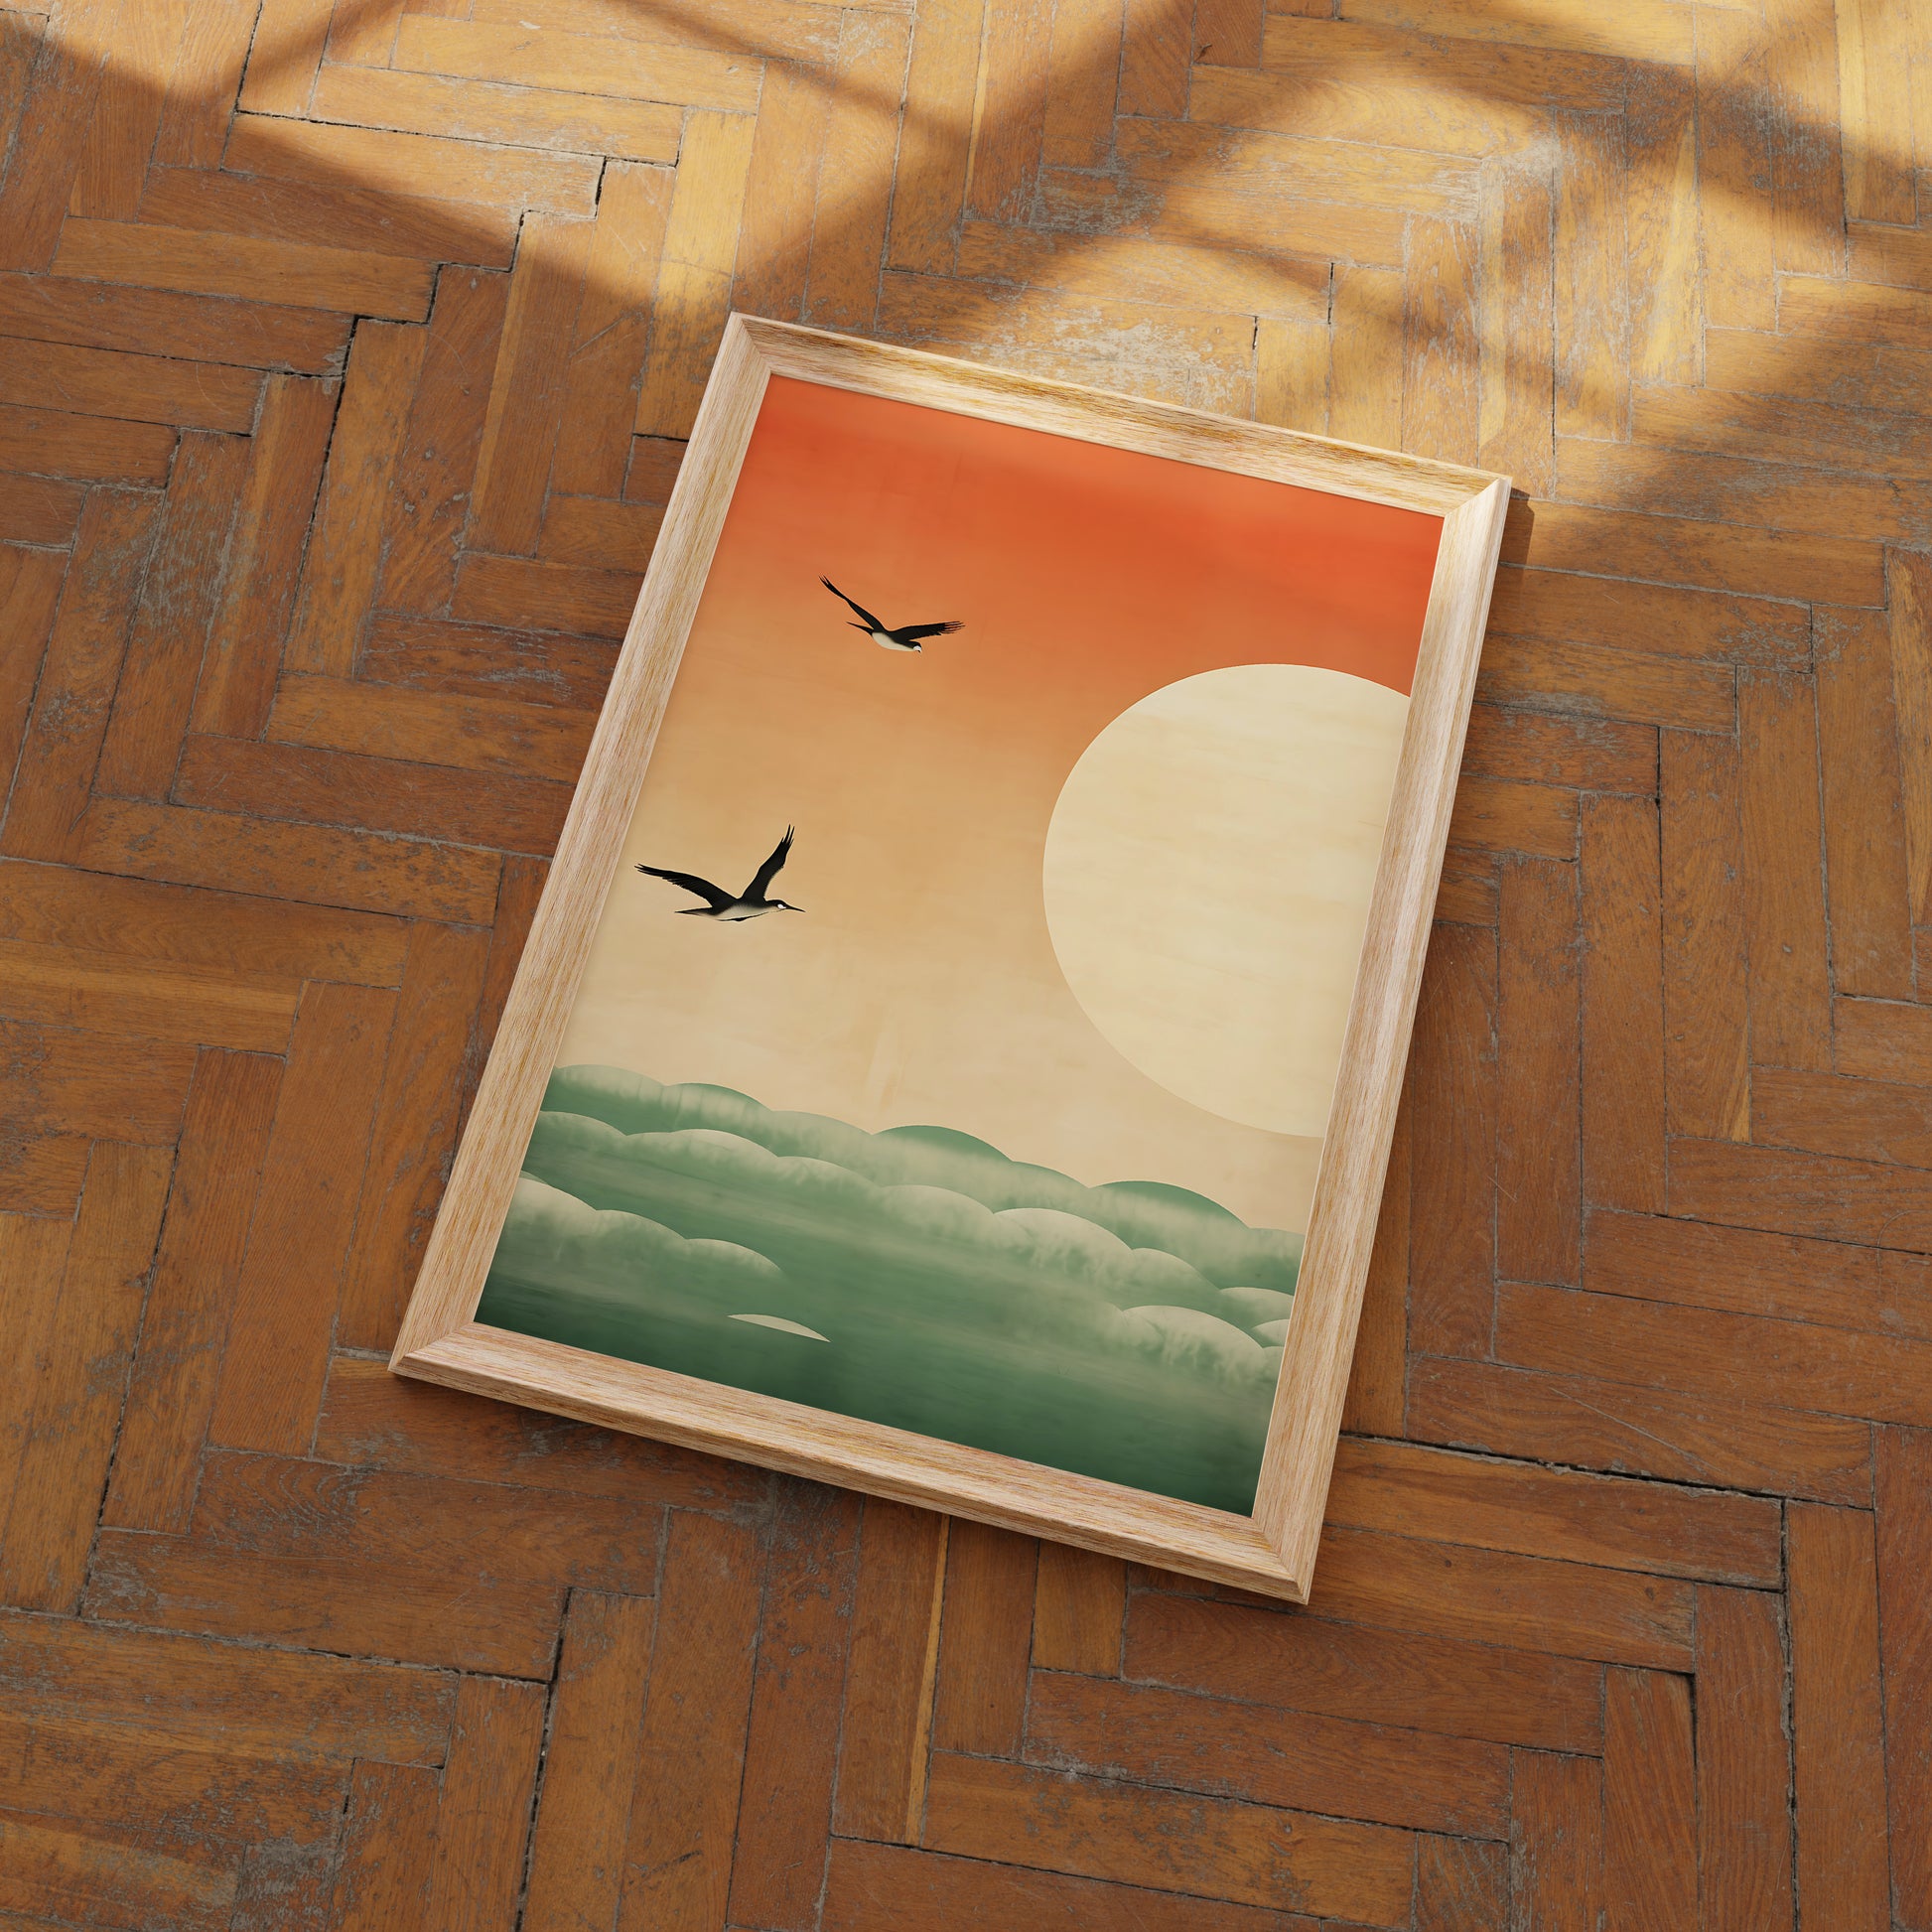 A framed painting of a sunset with birds flying over clouds, on a wooden floor.